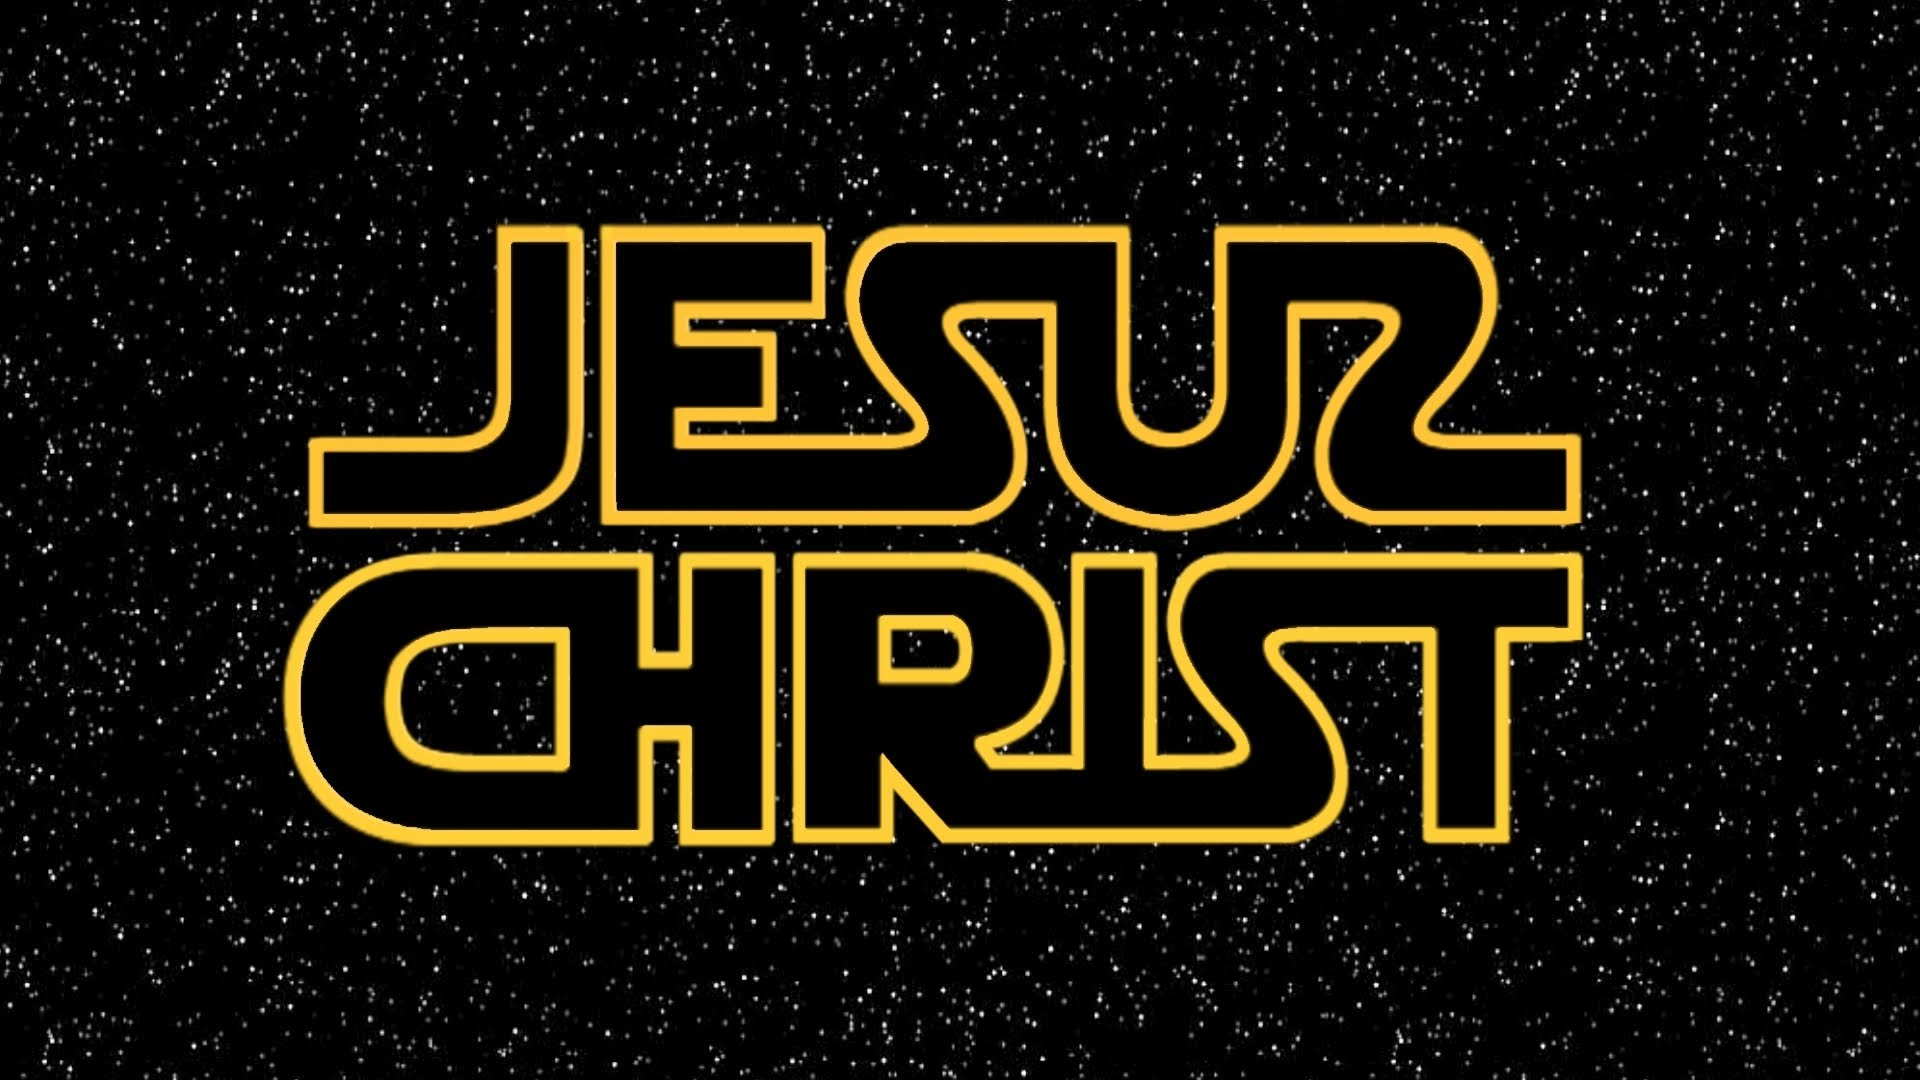 Does the Bible talk about ‘the Force’ in Star Wars?